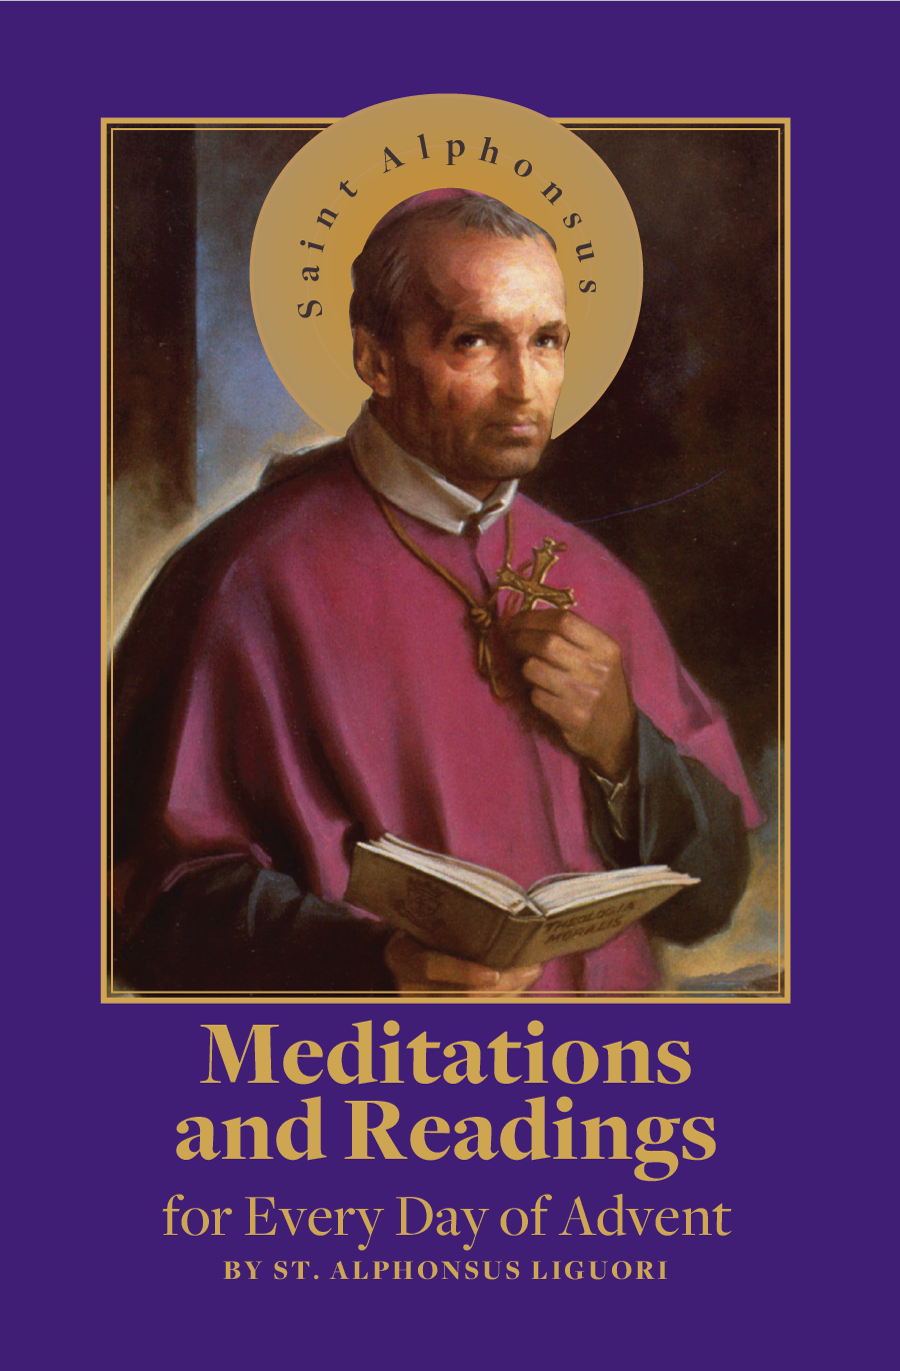 Meditations and Readings for Every Day of Advent by St. Alphonsus Liguori